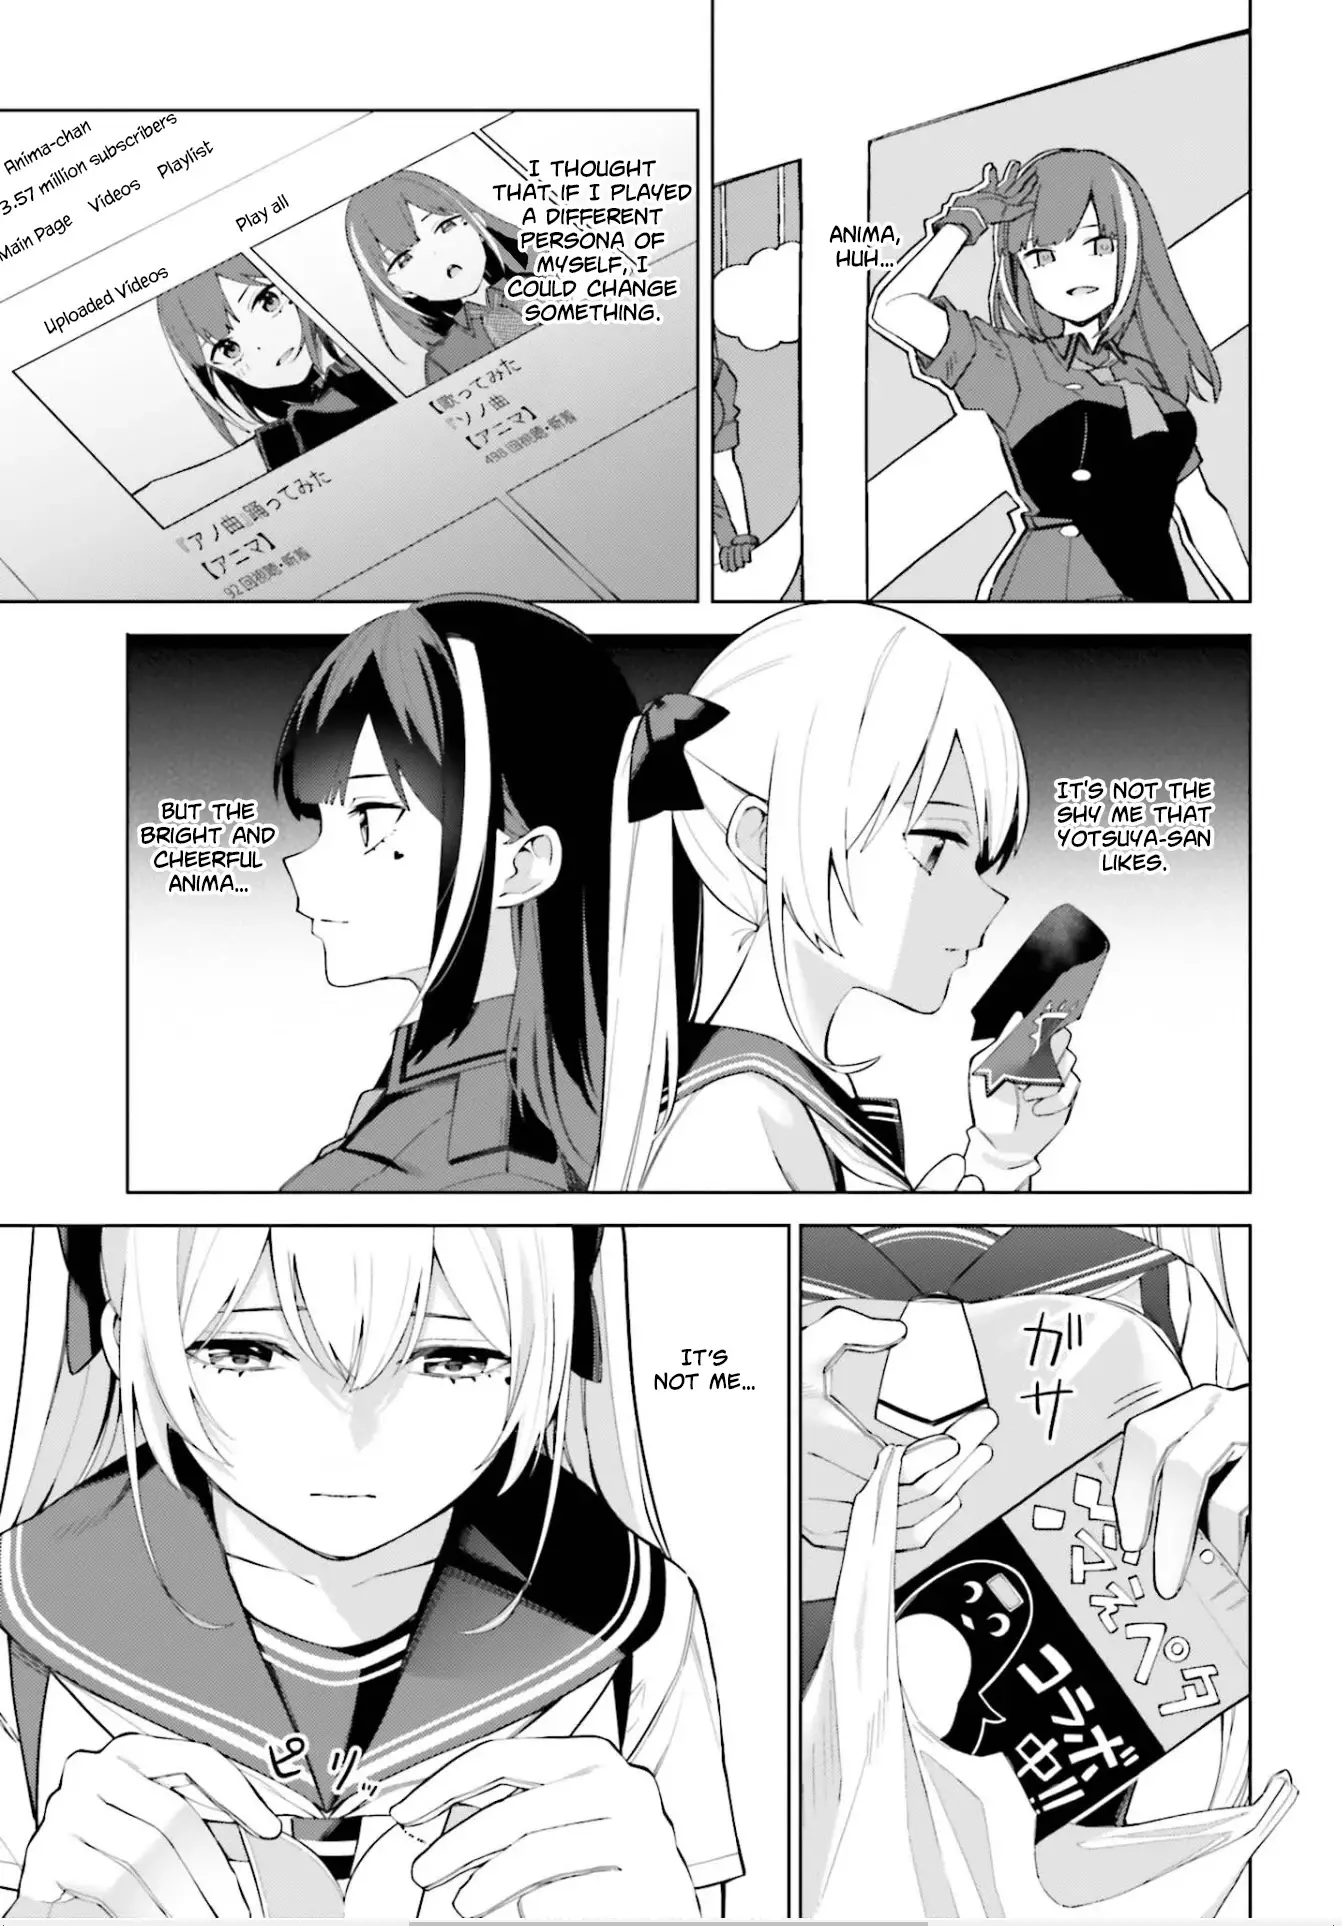 I Don't Understand Shirogane-San's Facial Expression At All - 8 page 20-28d1bee7